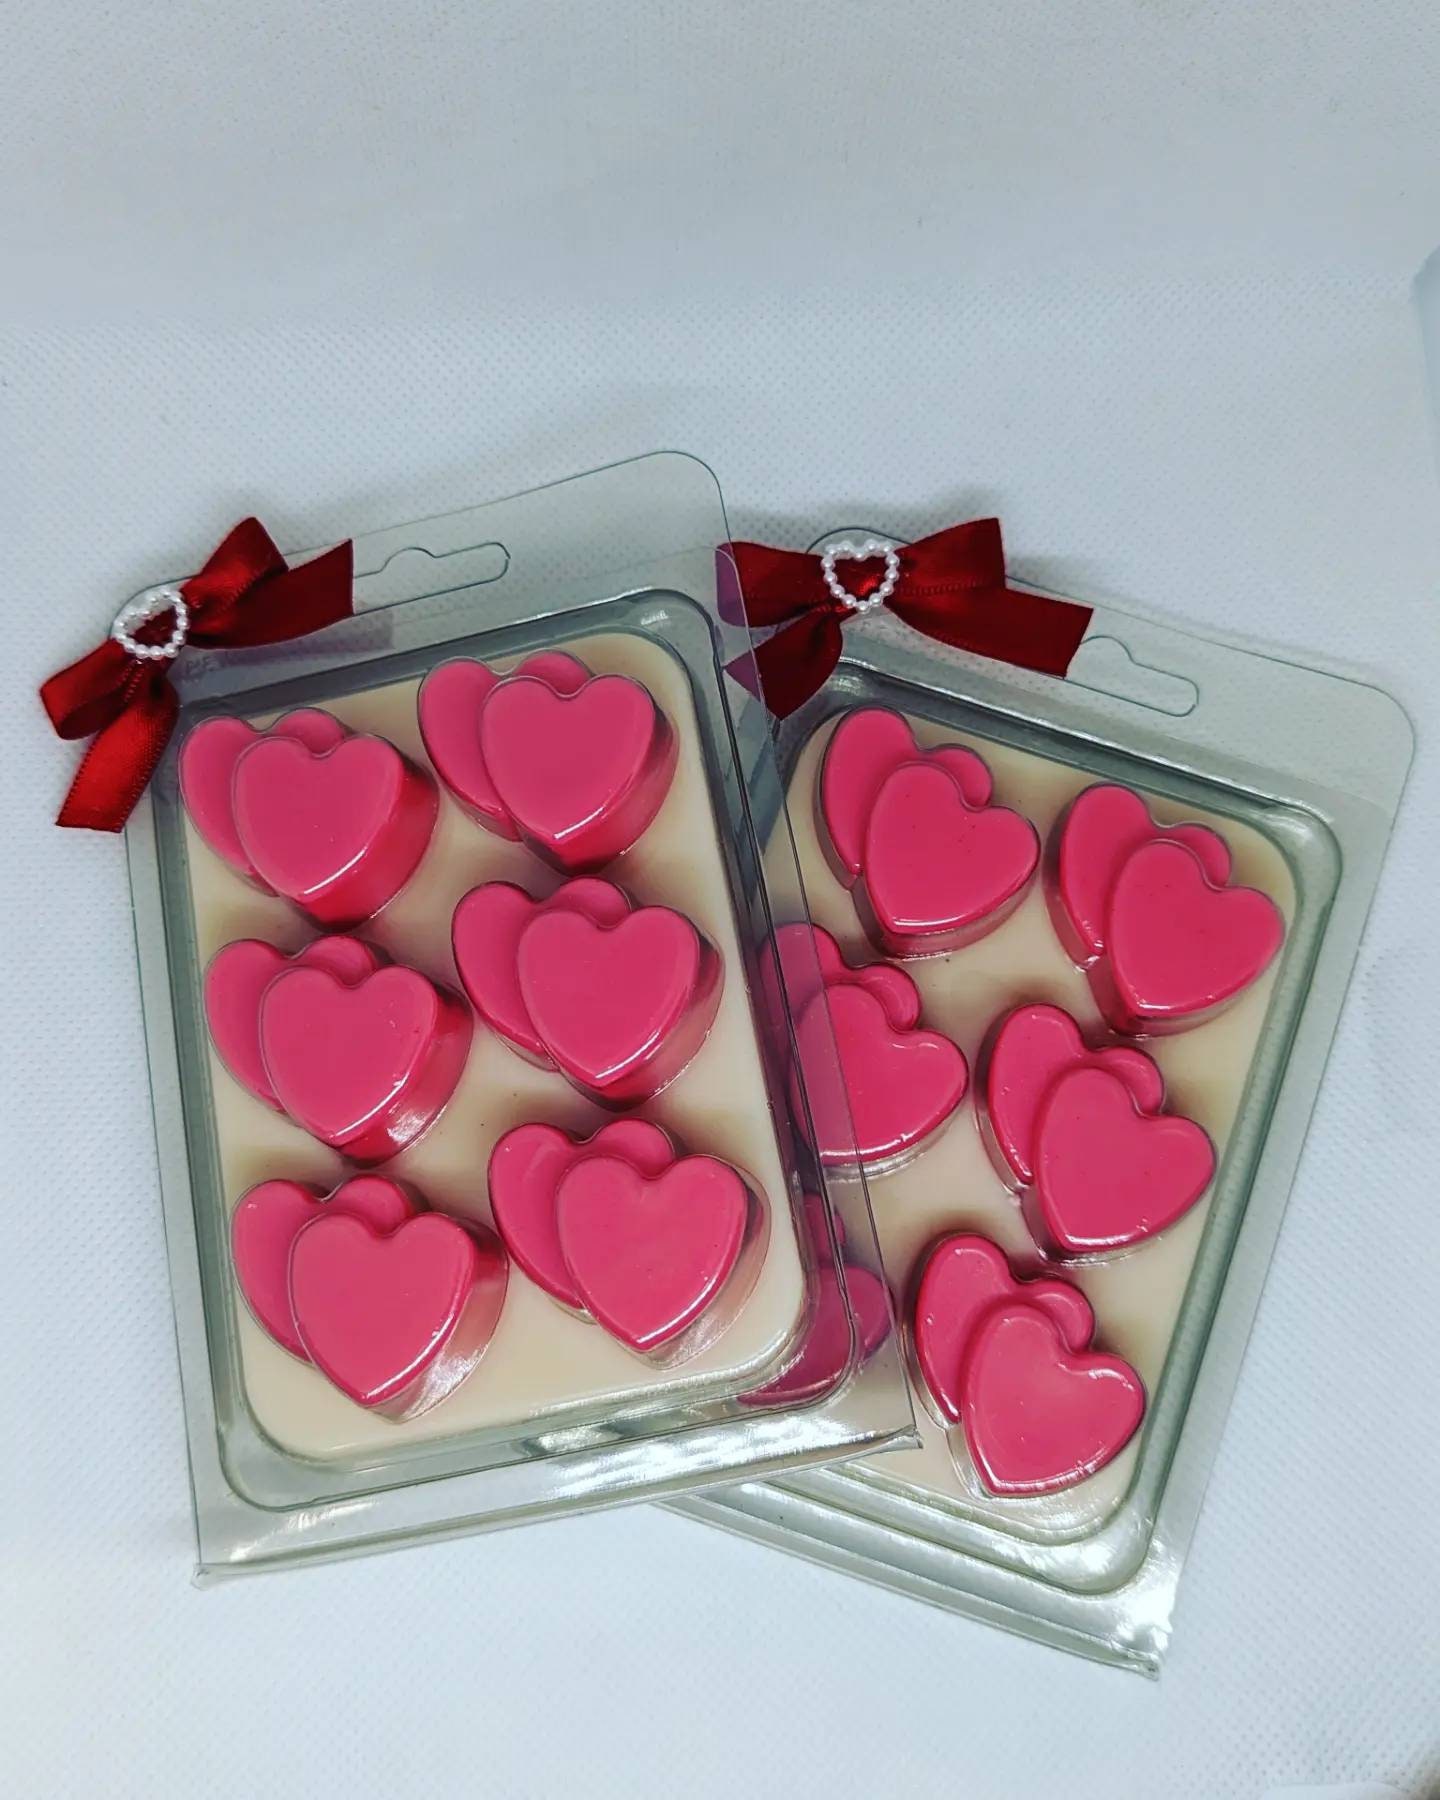 Thyle 100 Packs Valentine's Day Wax Melts Clamshell Molds 1.3 oz